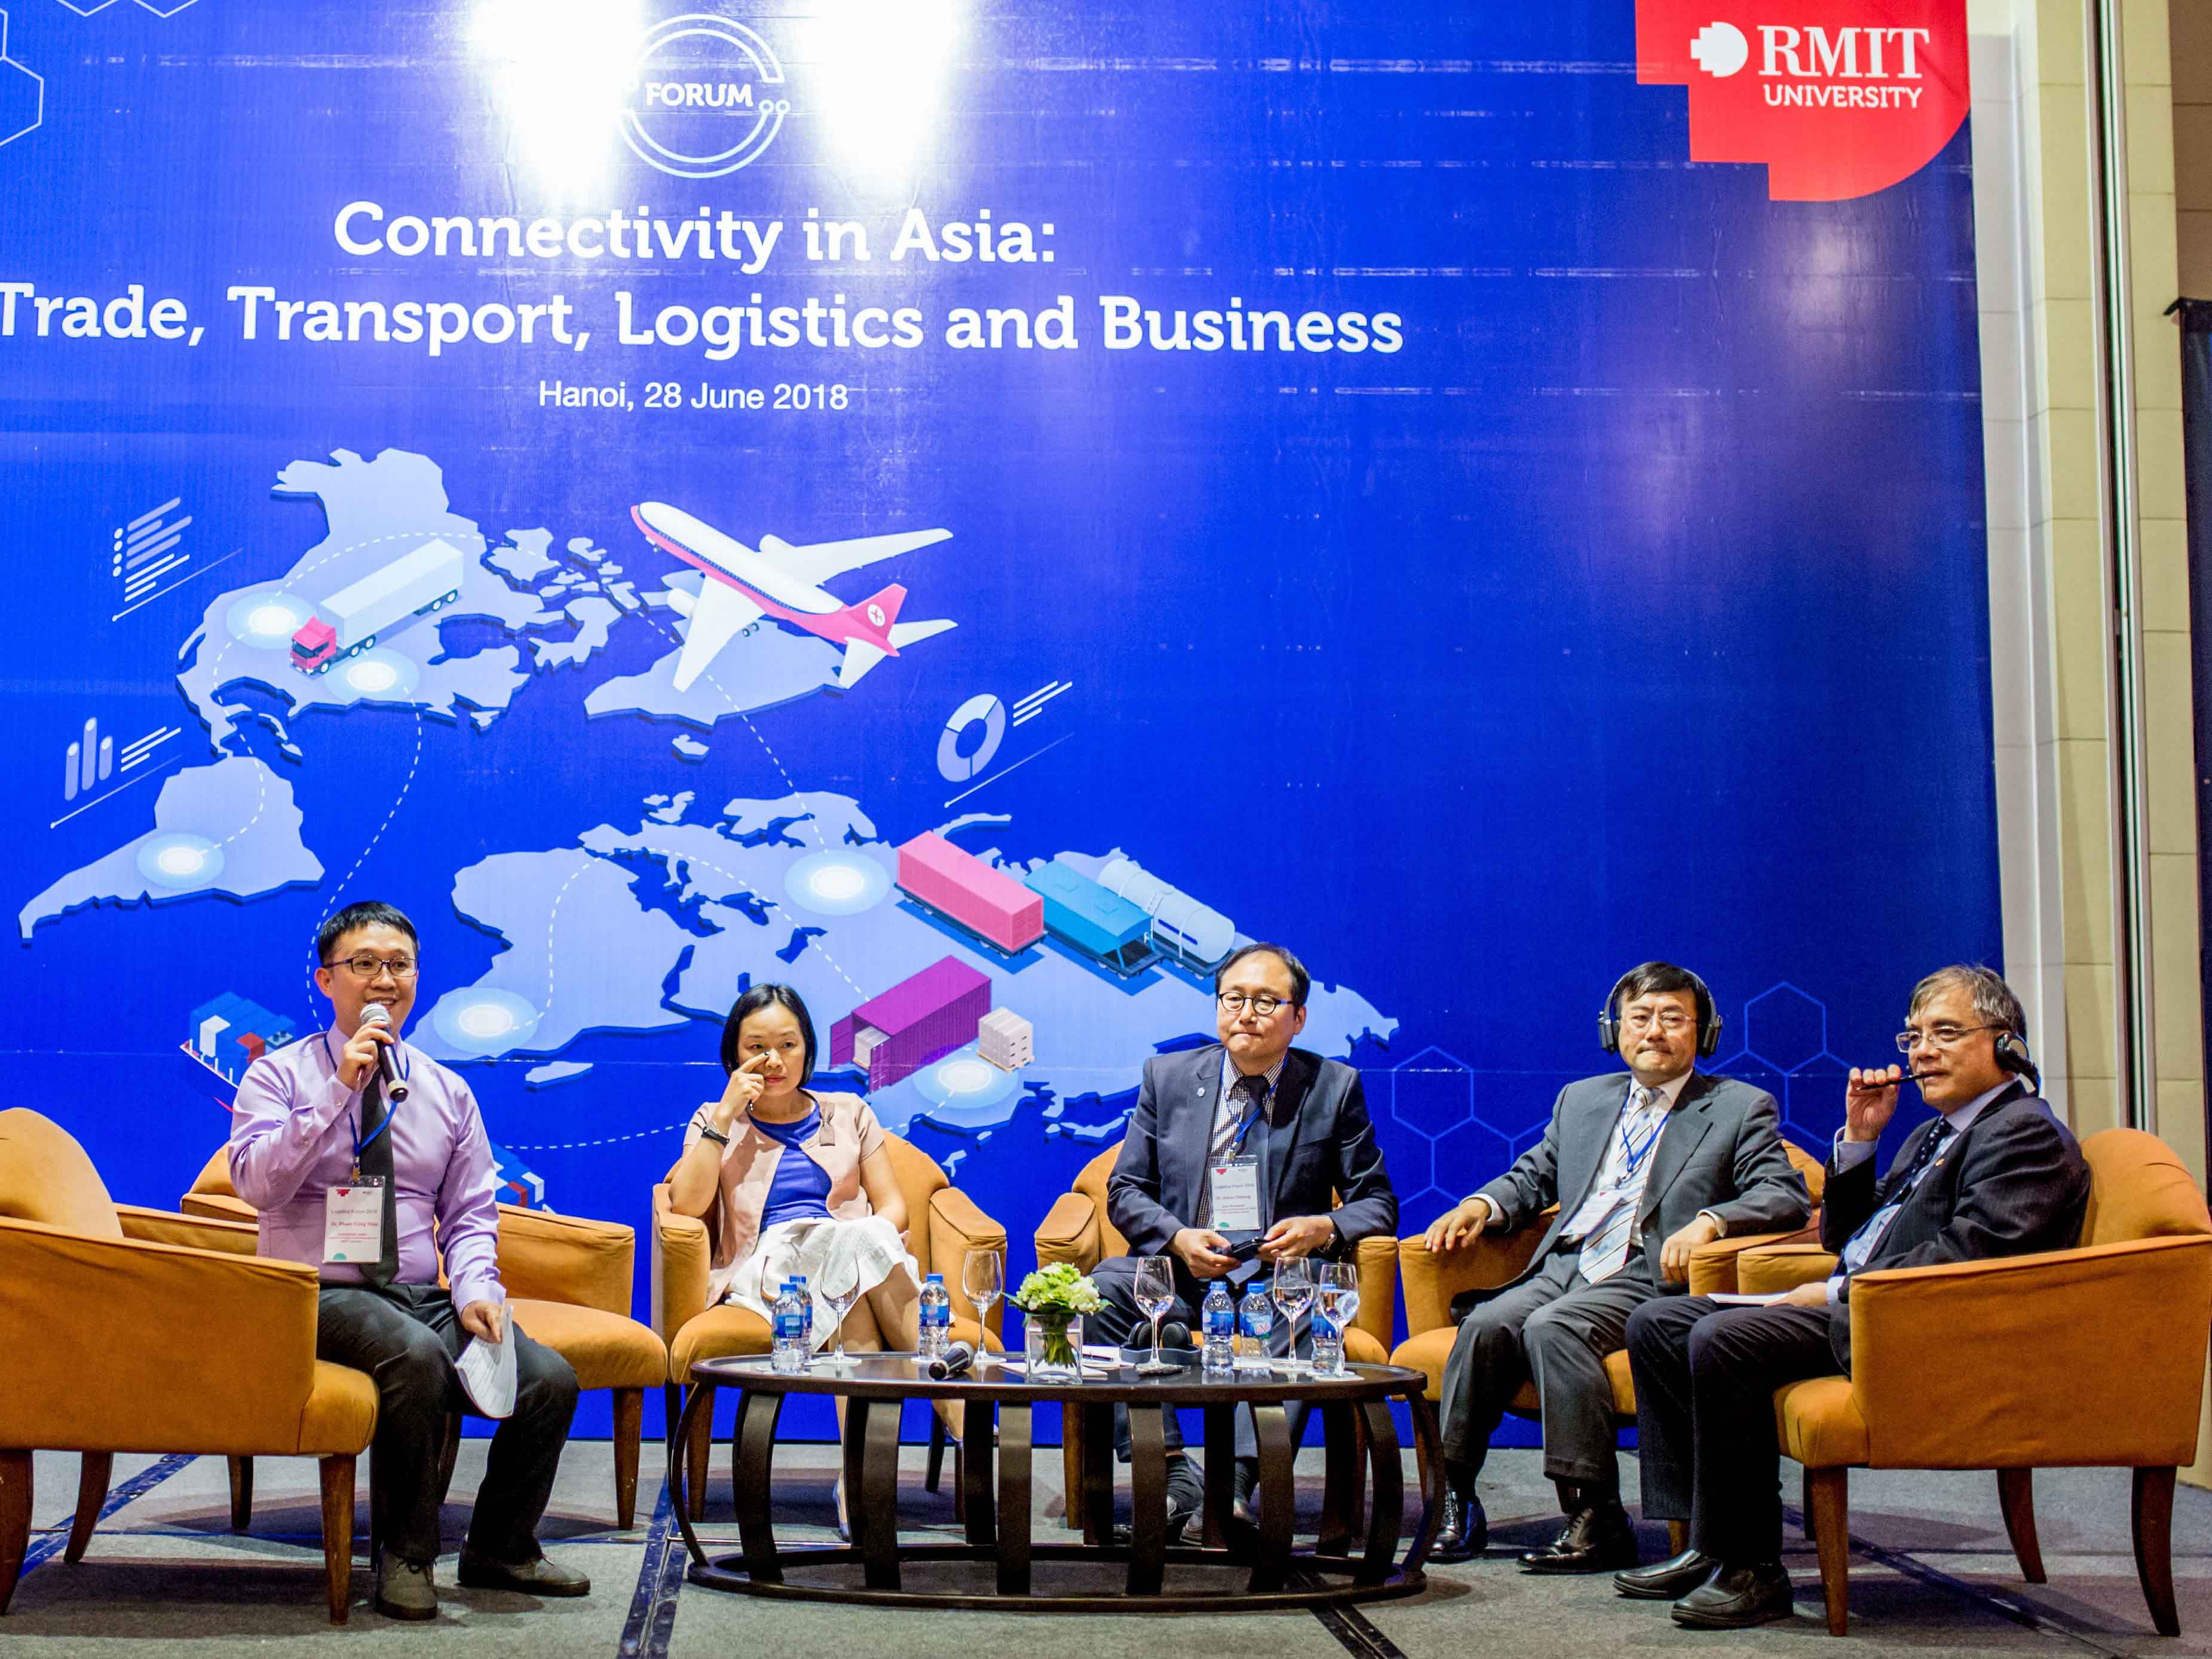 Dr Pham Cong Hiep (left), the Discipline Lead for the Logistics and Supply Chain Management program in the School of Business & Management at RMIT Vietnam, facilitated the discussion.